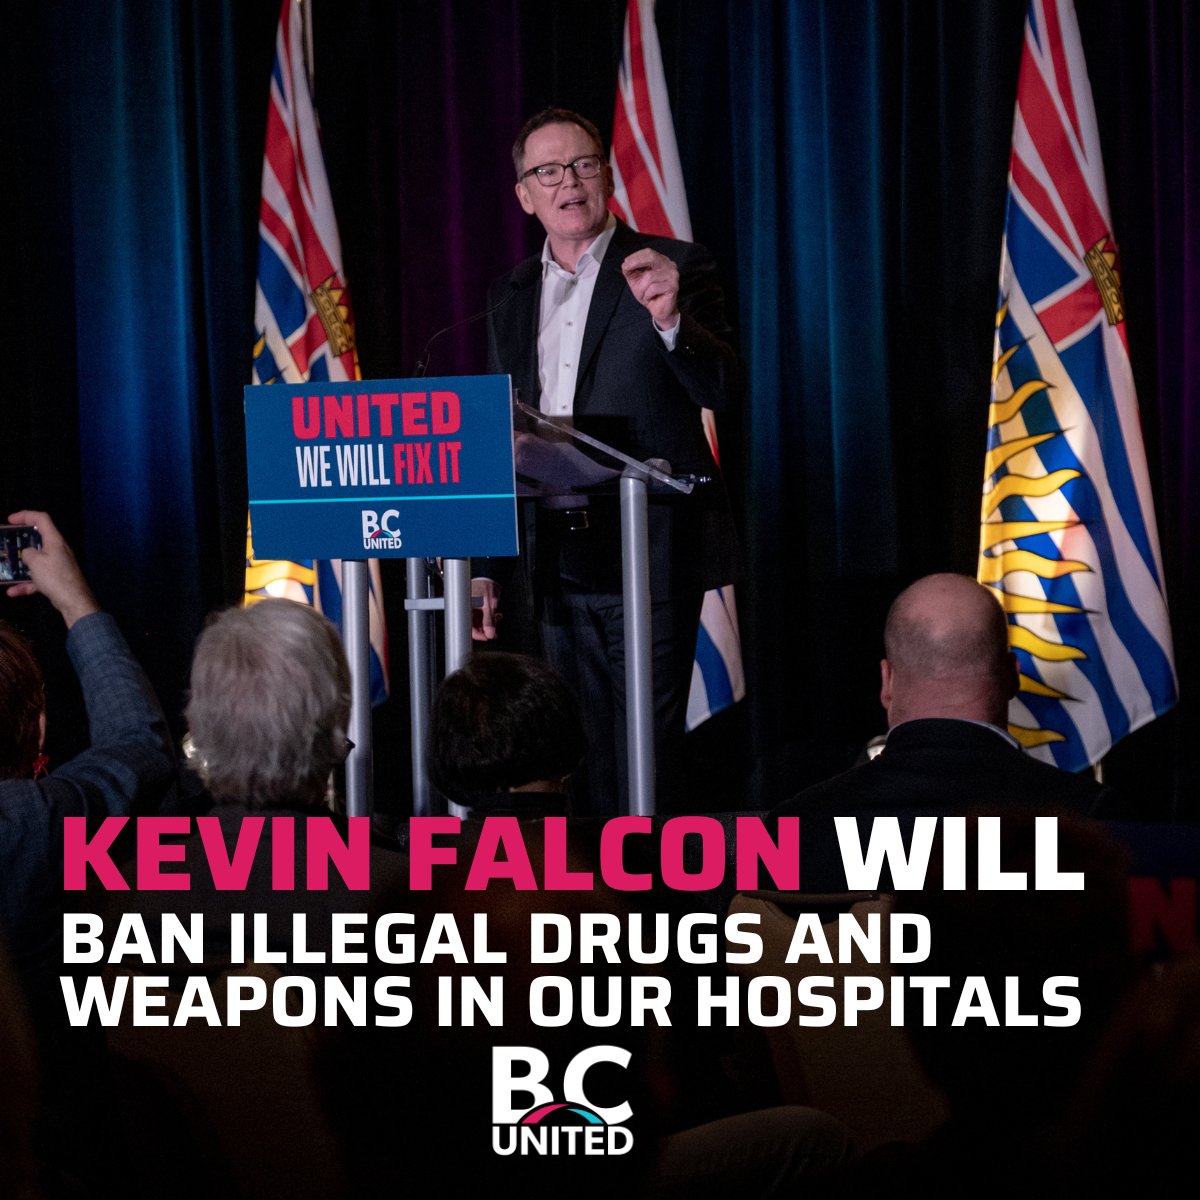 We don't need a committee to say you shouldn't be allowed to deal drugs, inhale toxic substances or bring weapons into our hospitals. 

Kevin Falcon and BC United will ban illegal drugs and weapons from our hospitals and health care settings. 

#UnitedWeWillFixIt